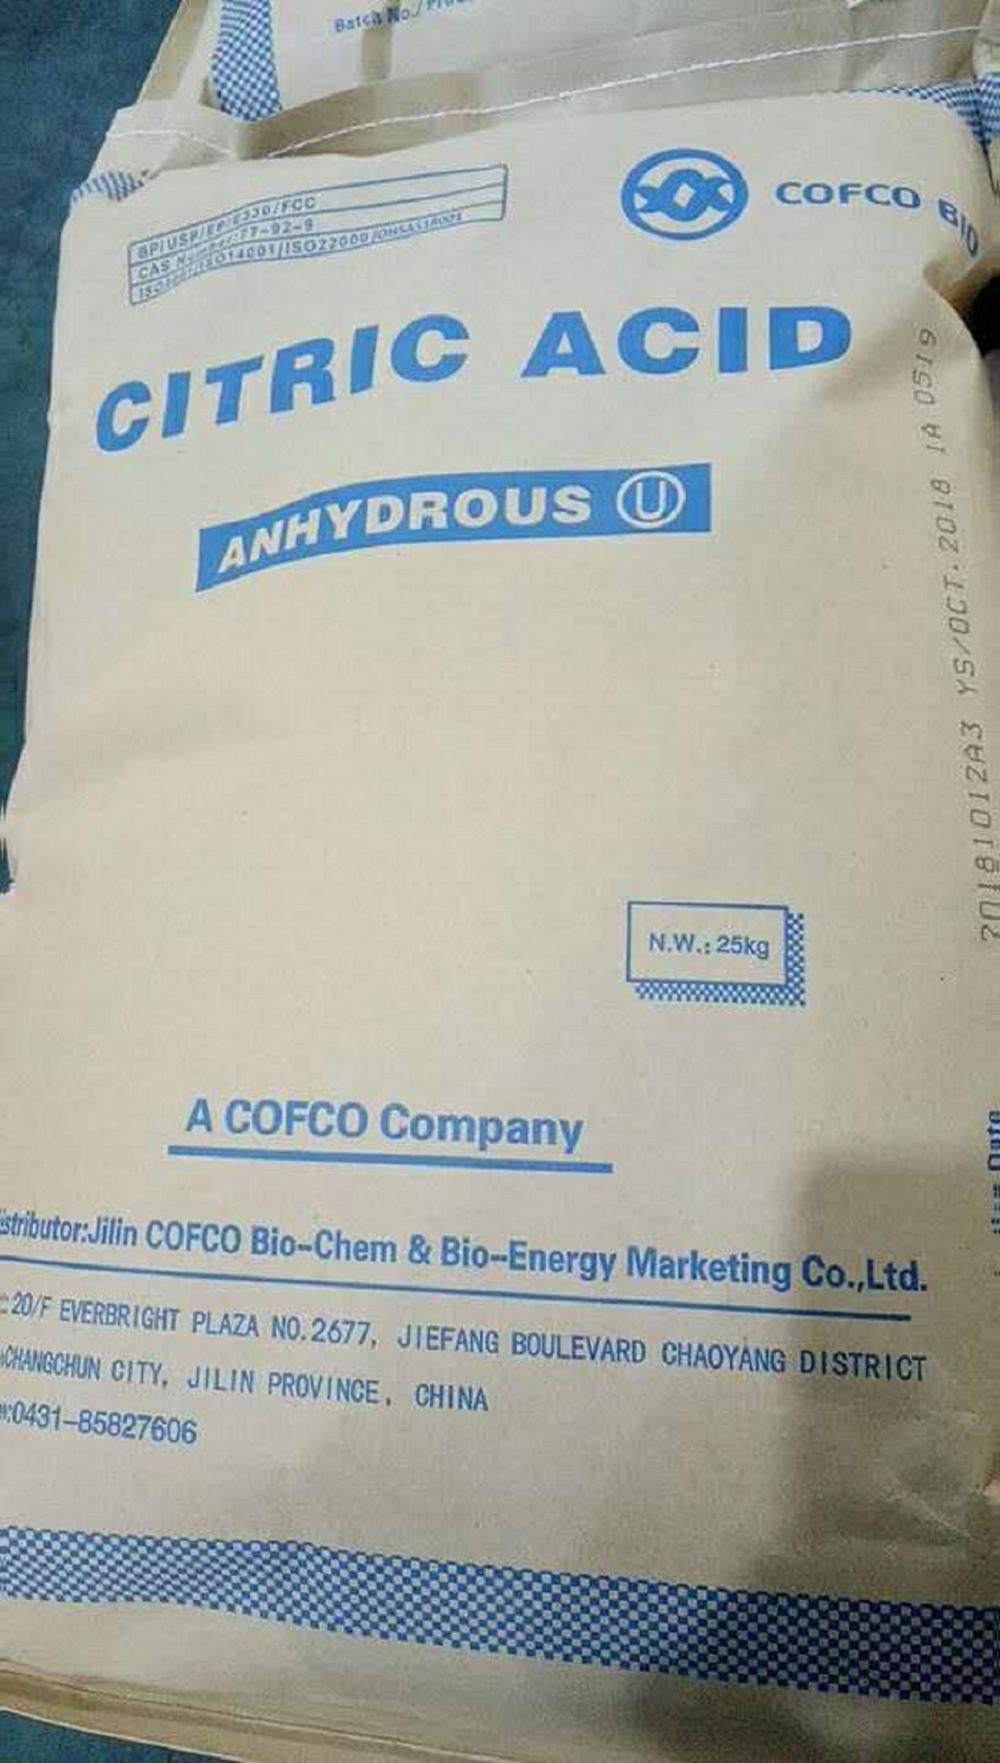 ANHYDROUS CITRIC ACID